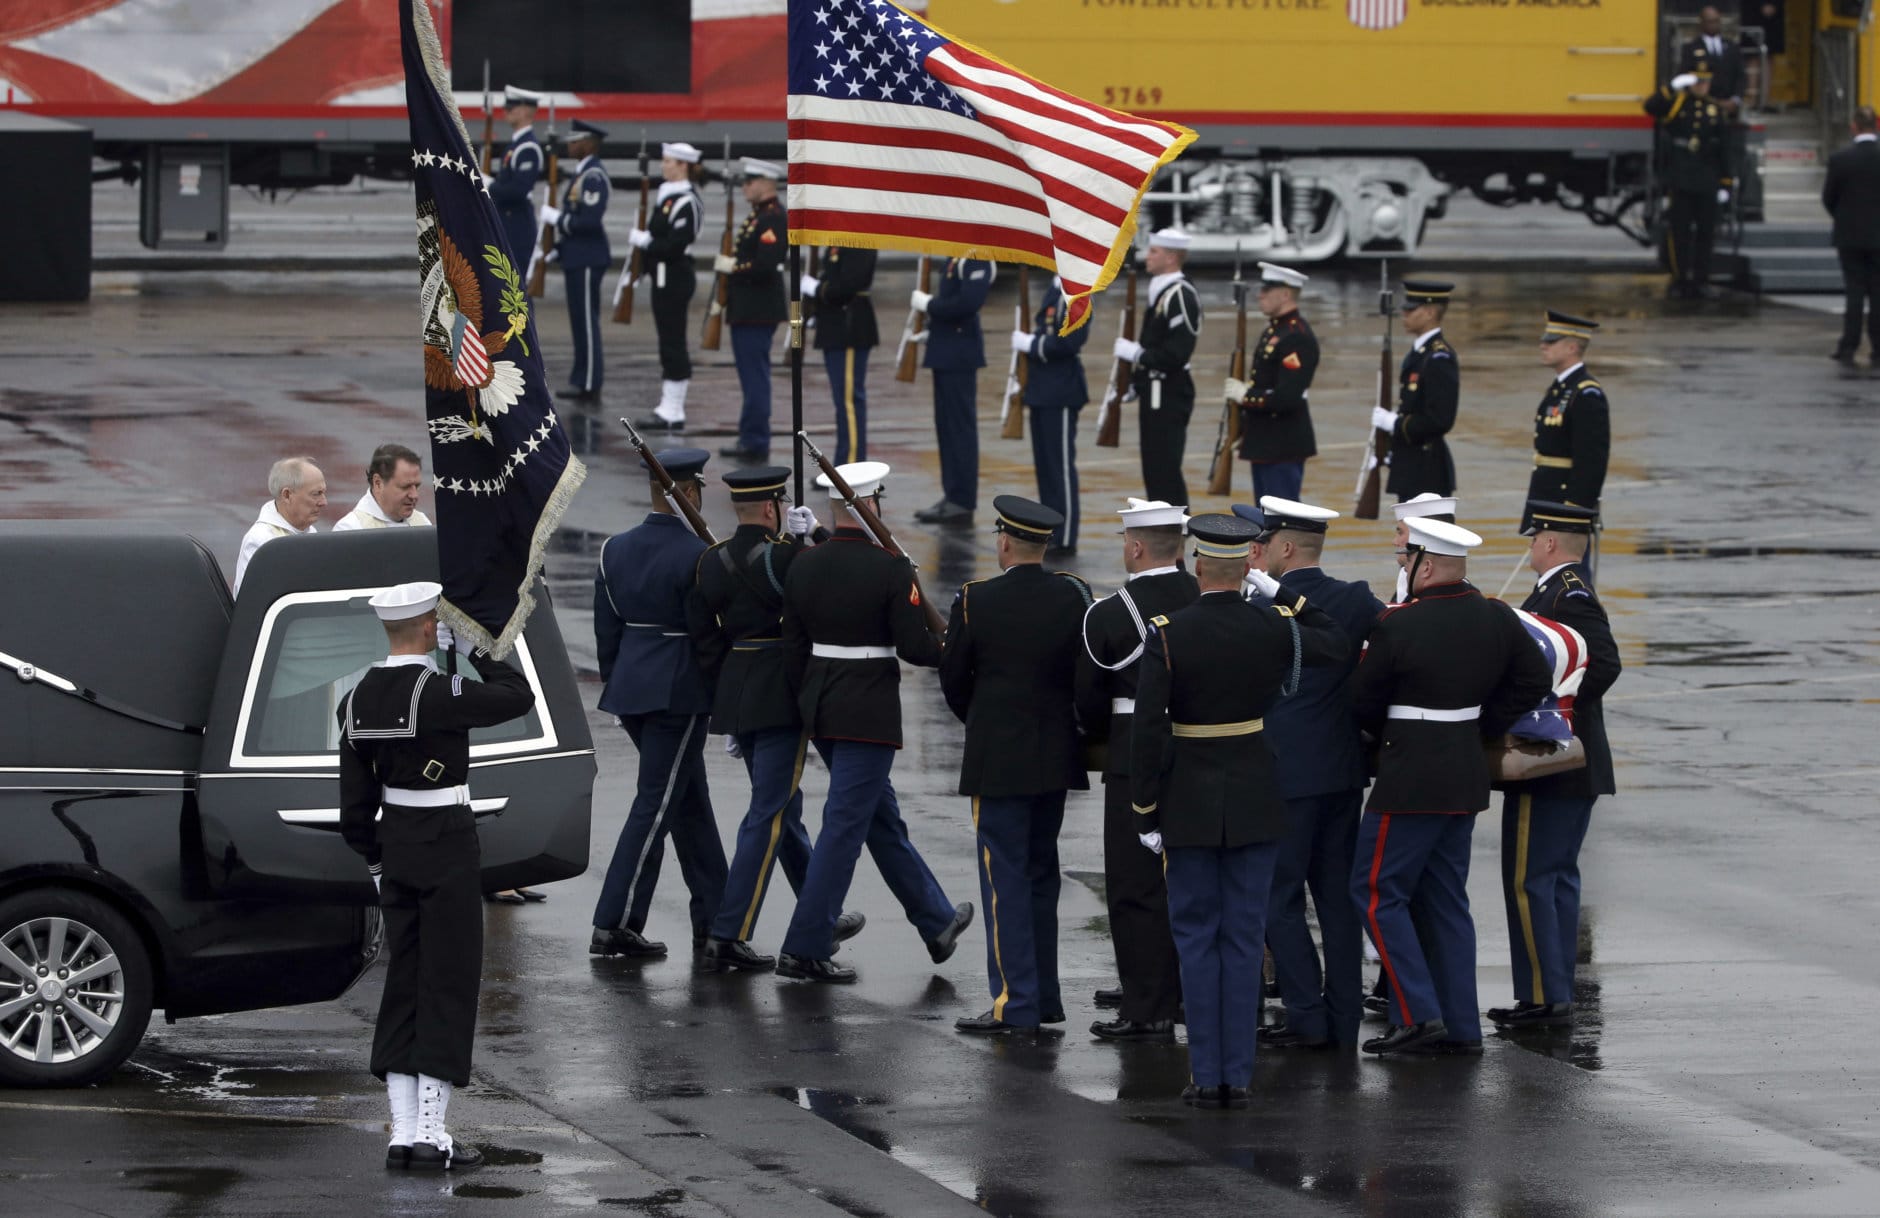 The flag-draped casket of former President George H.W. Bush is carried by a joint services military honor guard from a hearse at Union Pacific Westfield auto facility Thursday, Dec. 6, 2018, in Spring, Texas. (AP Photo/Kiichiro Sato)